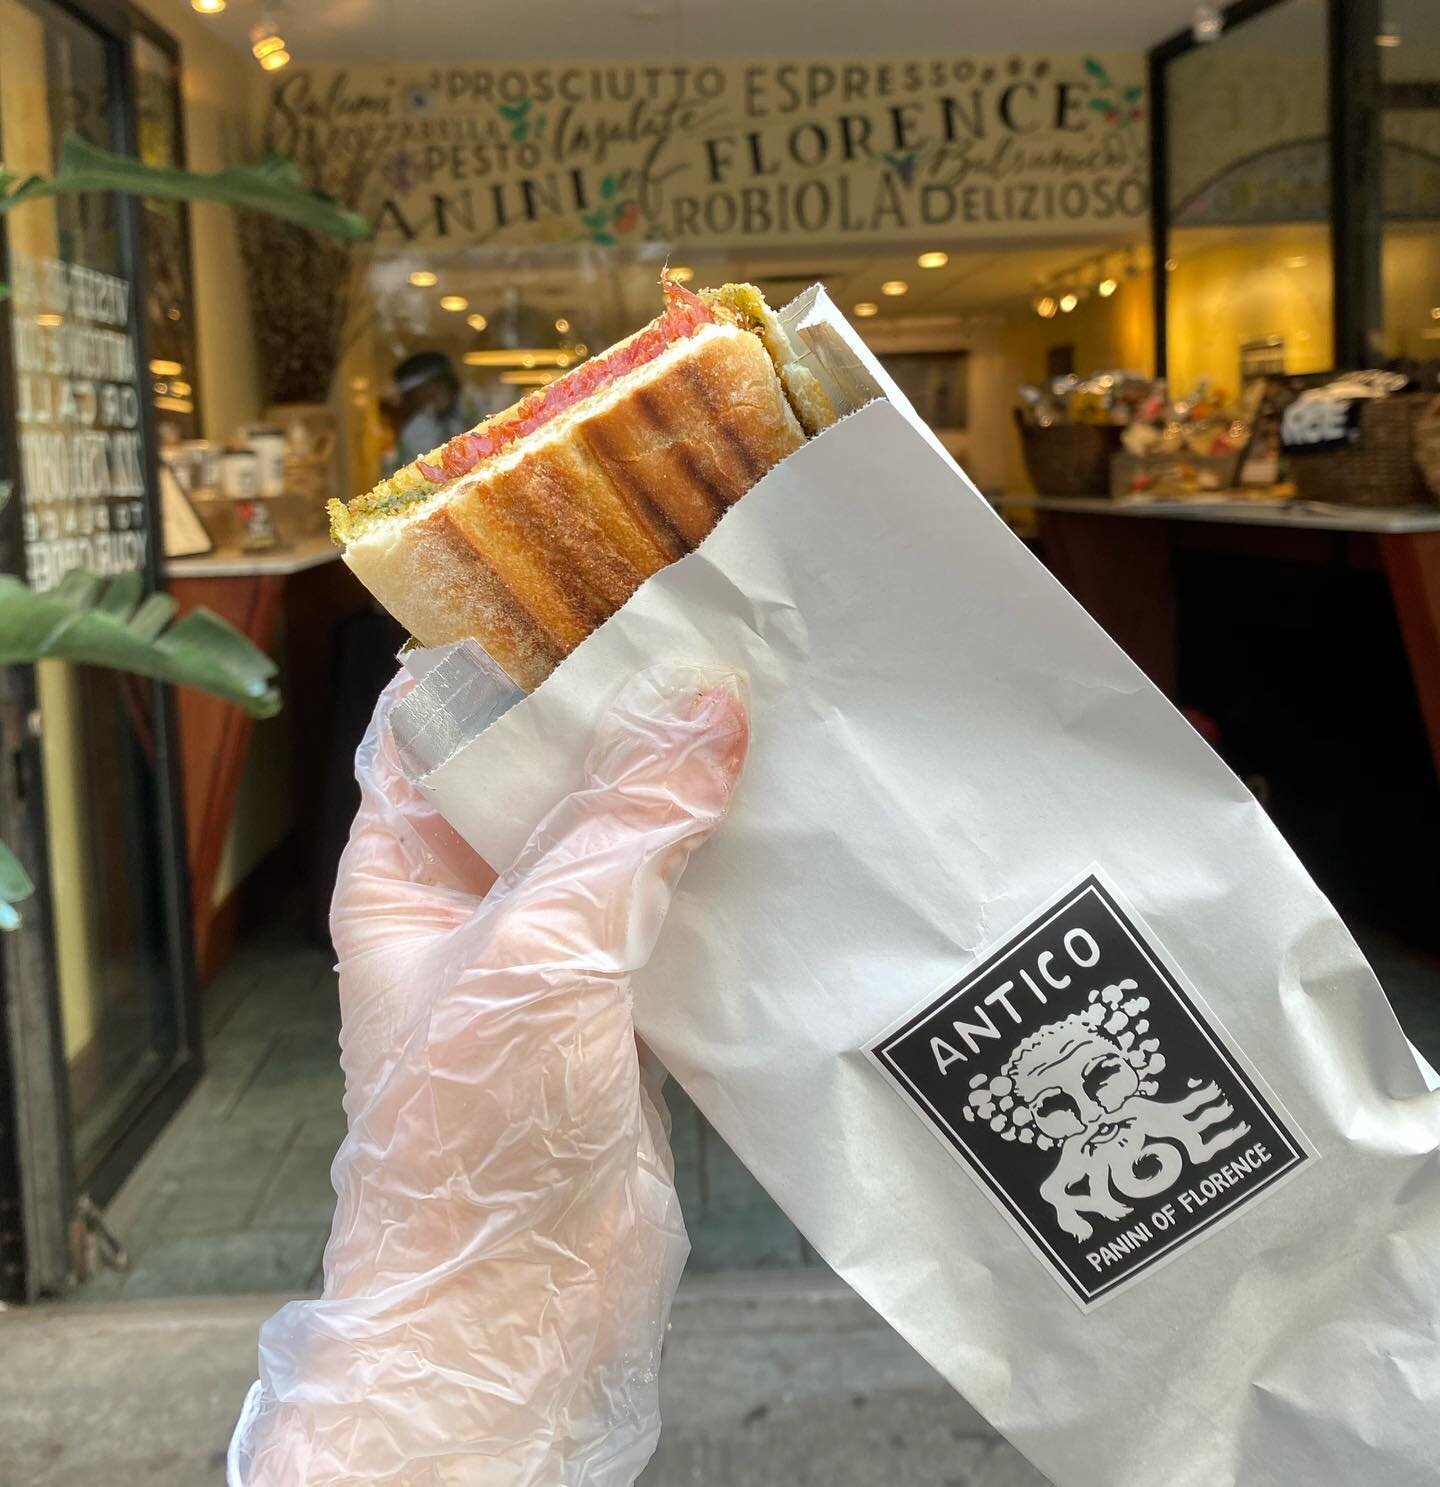 FAVORITE MEMORY OR PANINO FROM ANTICO NO&Egrave;??
&bull;
We&rsquo;re feeling nostalgic &amp; want to hear from our loyal customers.
&bull;
Drop us a comment of your favorite memory, your go-to order, or anything that made you smile about Antico No&e